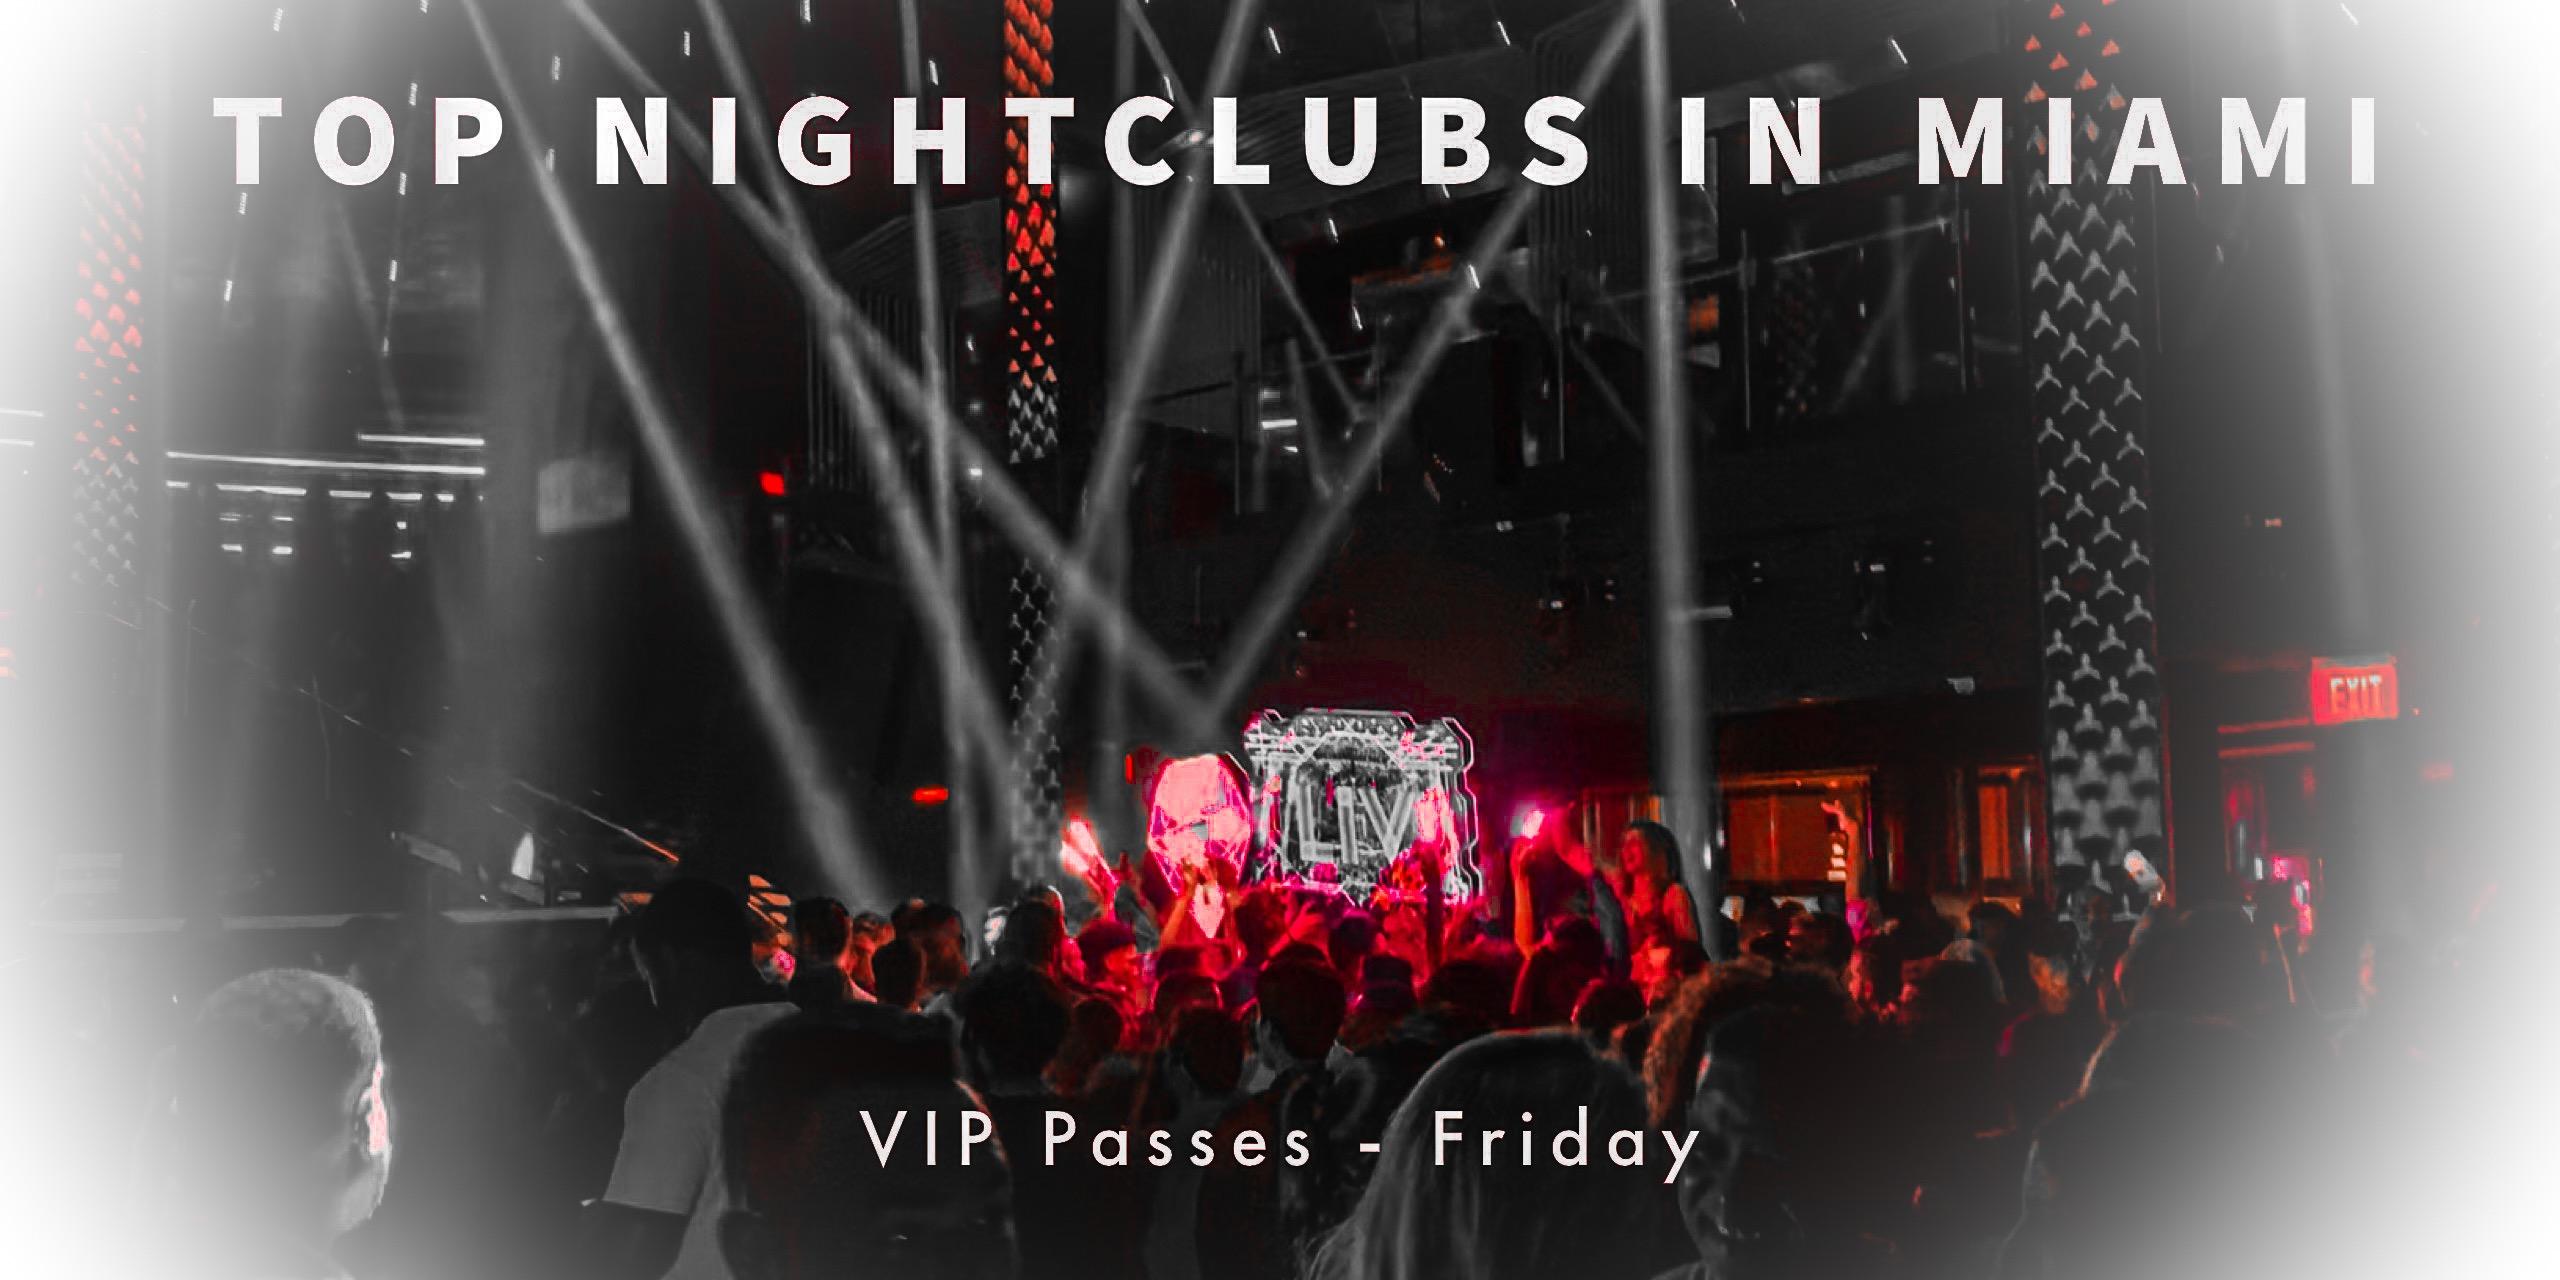 3 Parties for 1 Price! VIP PARTY PACKAGE DEAL in Miami Beach & South Beach